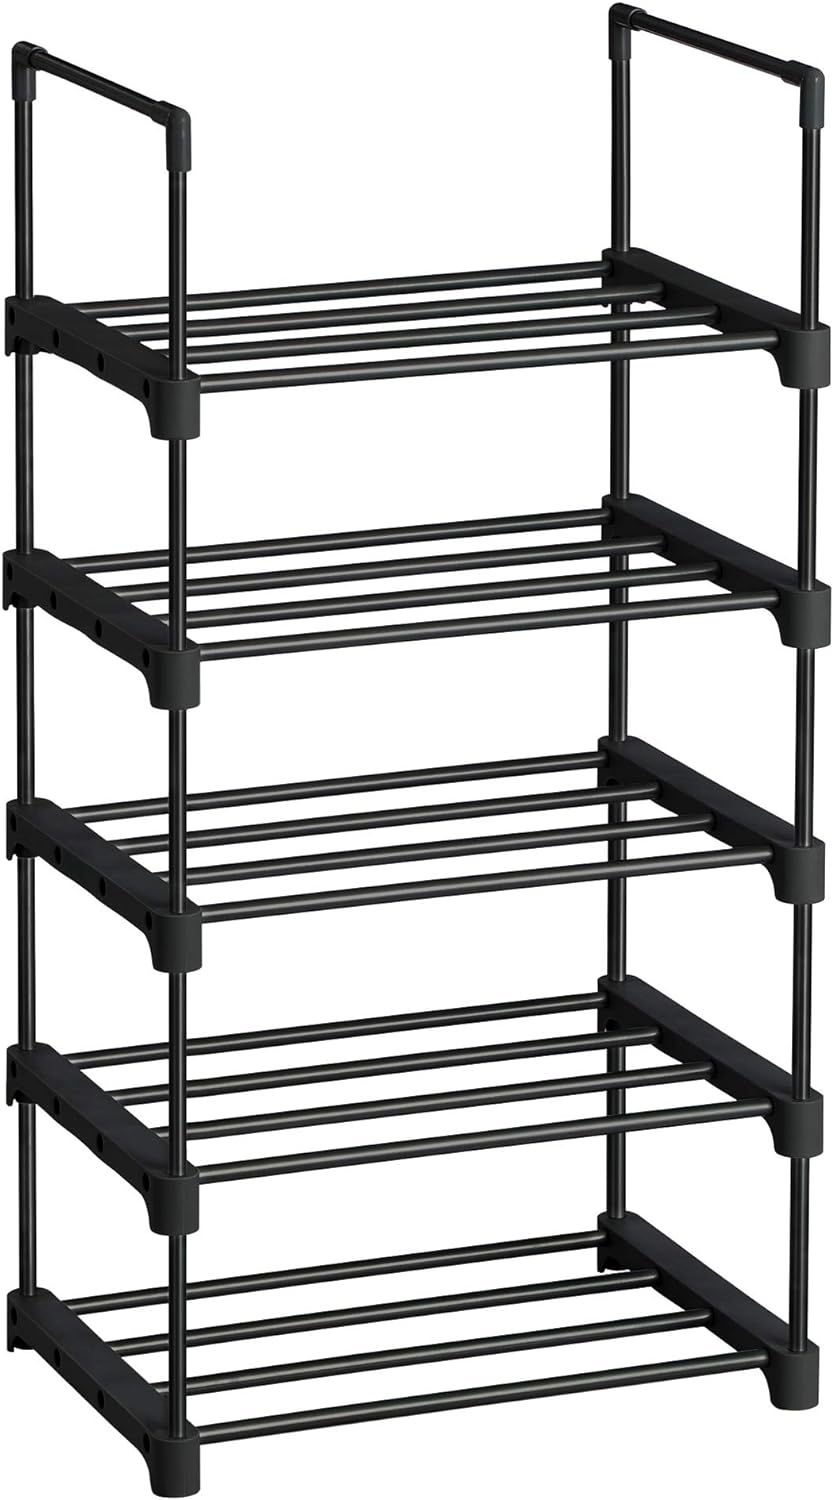 SONGMICS 5 Tier Metal Shoe Rack for 10 Pairs of Shoes Black